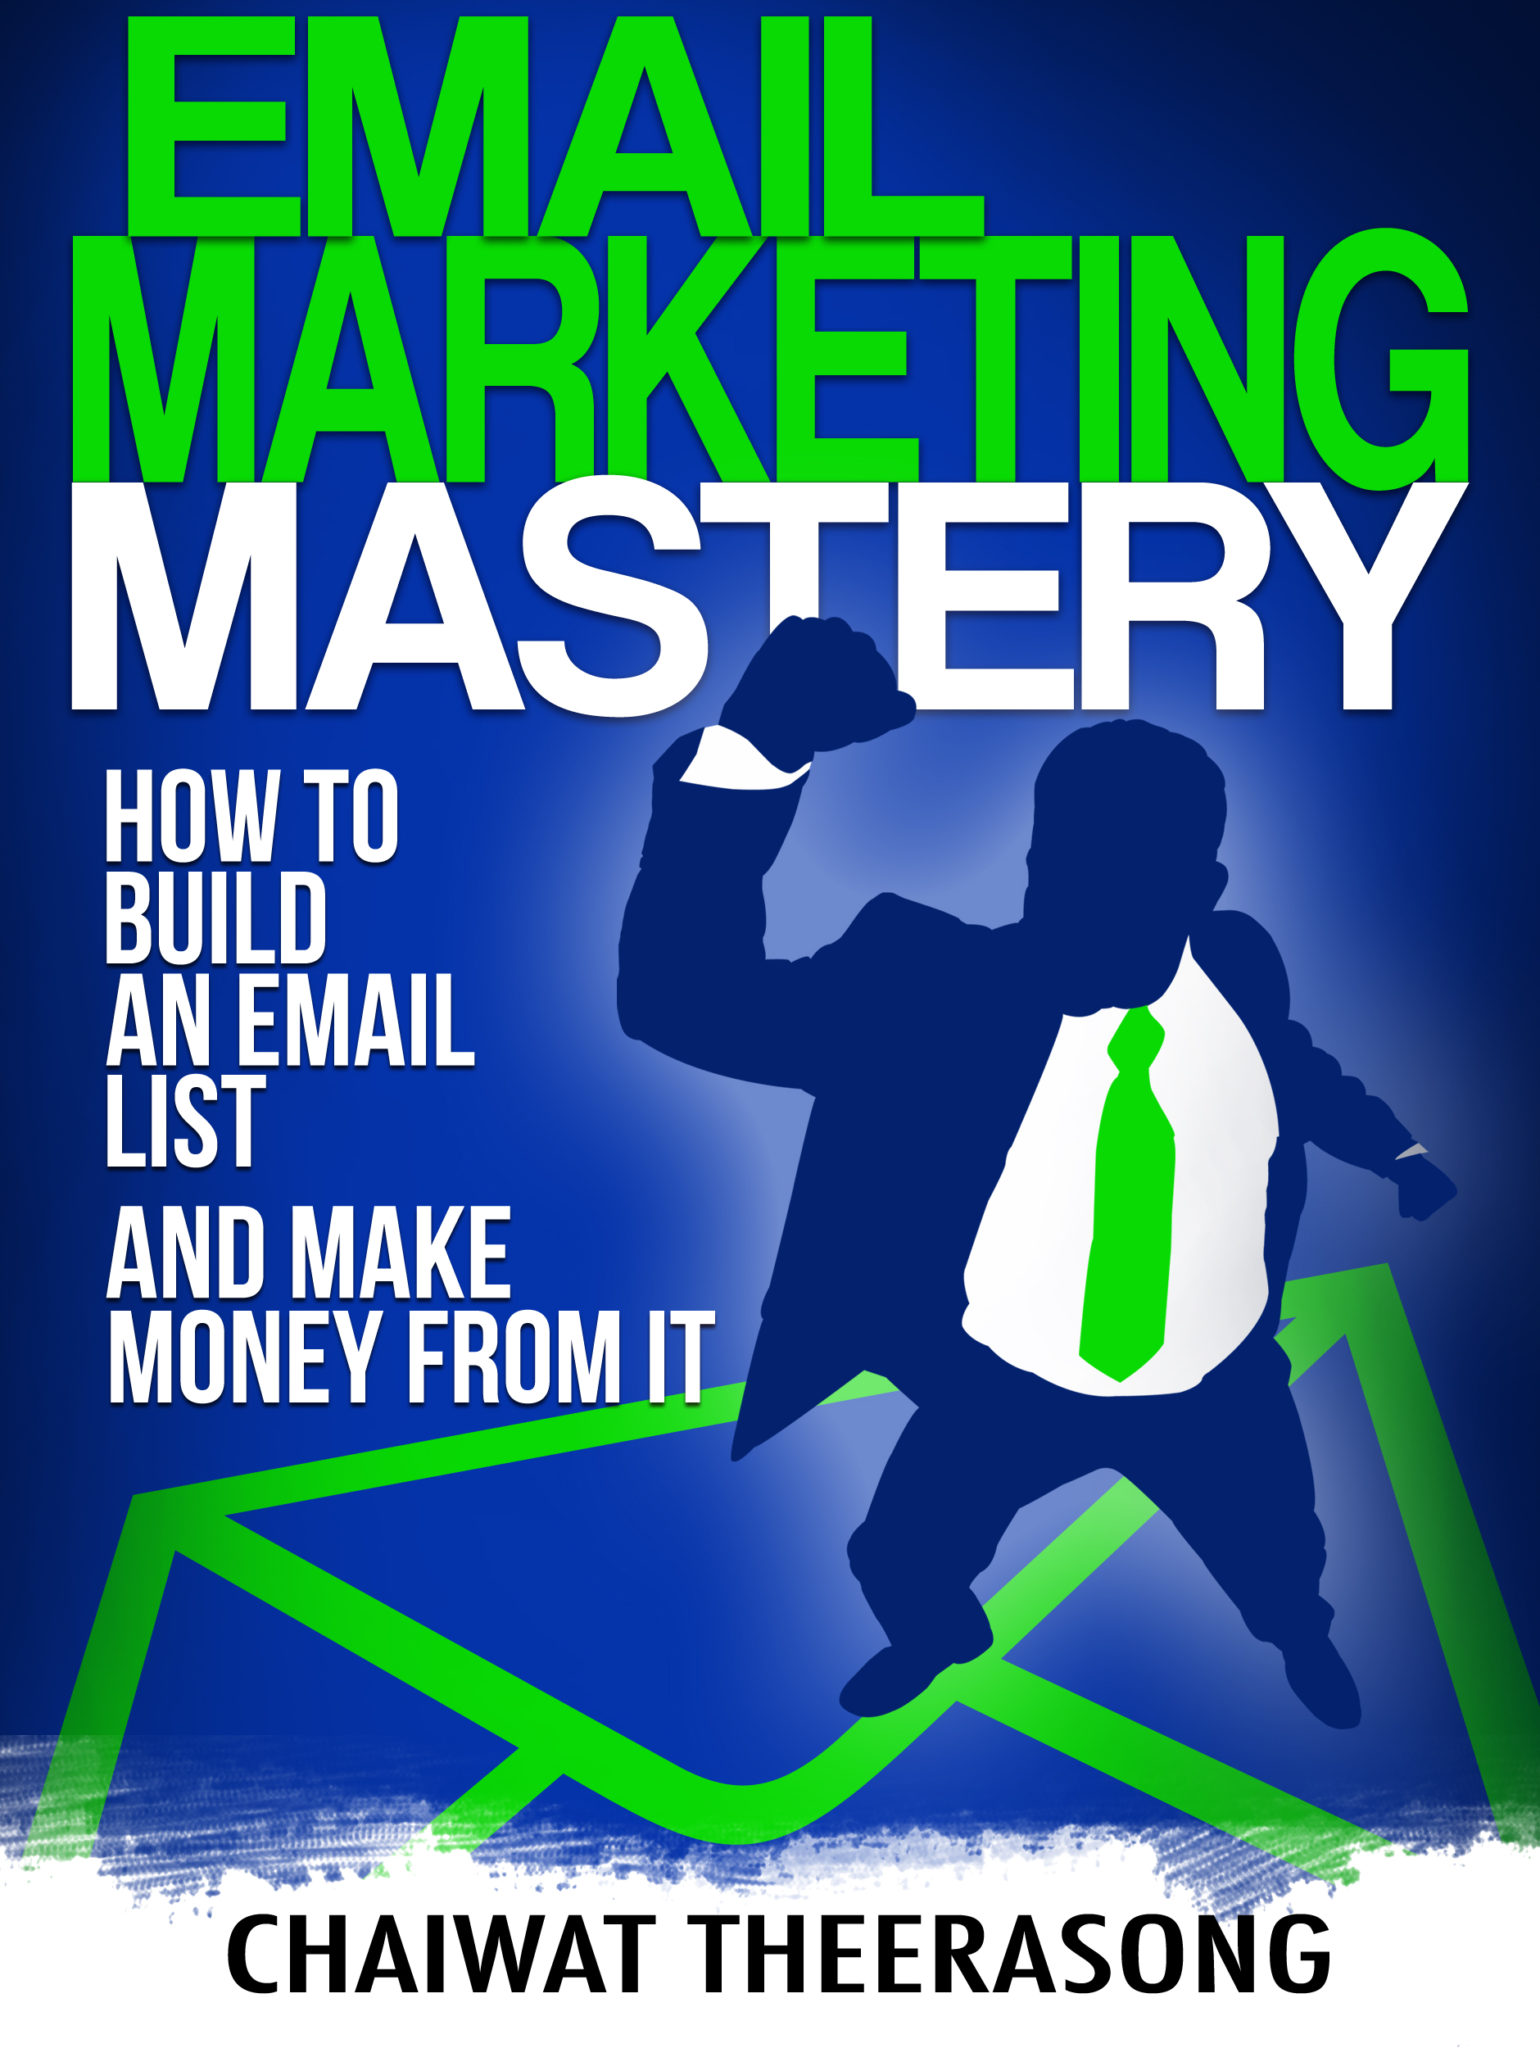 FREE: Email Marketing Mastery by Chaiwat Theerasong